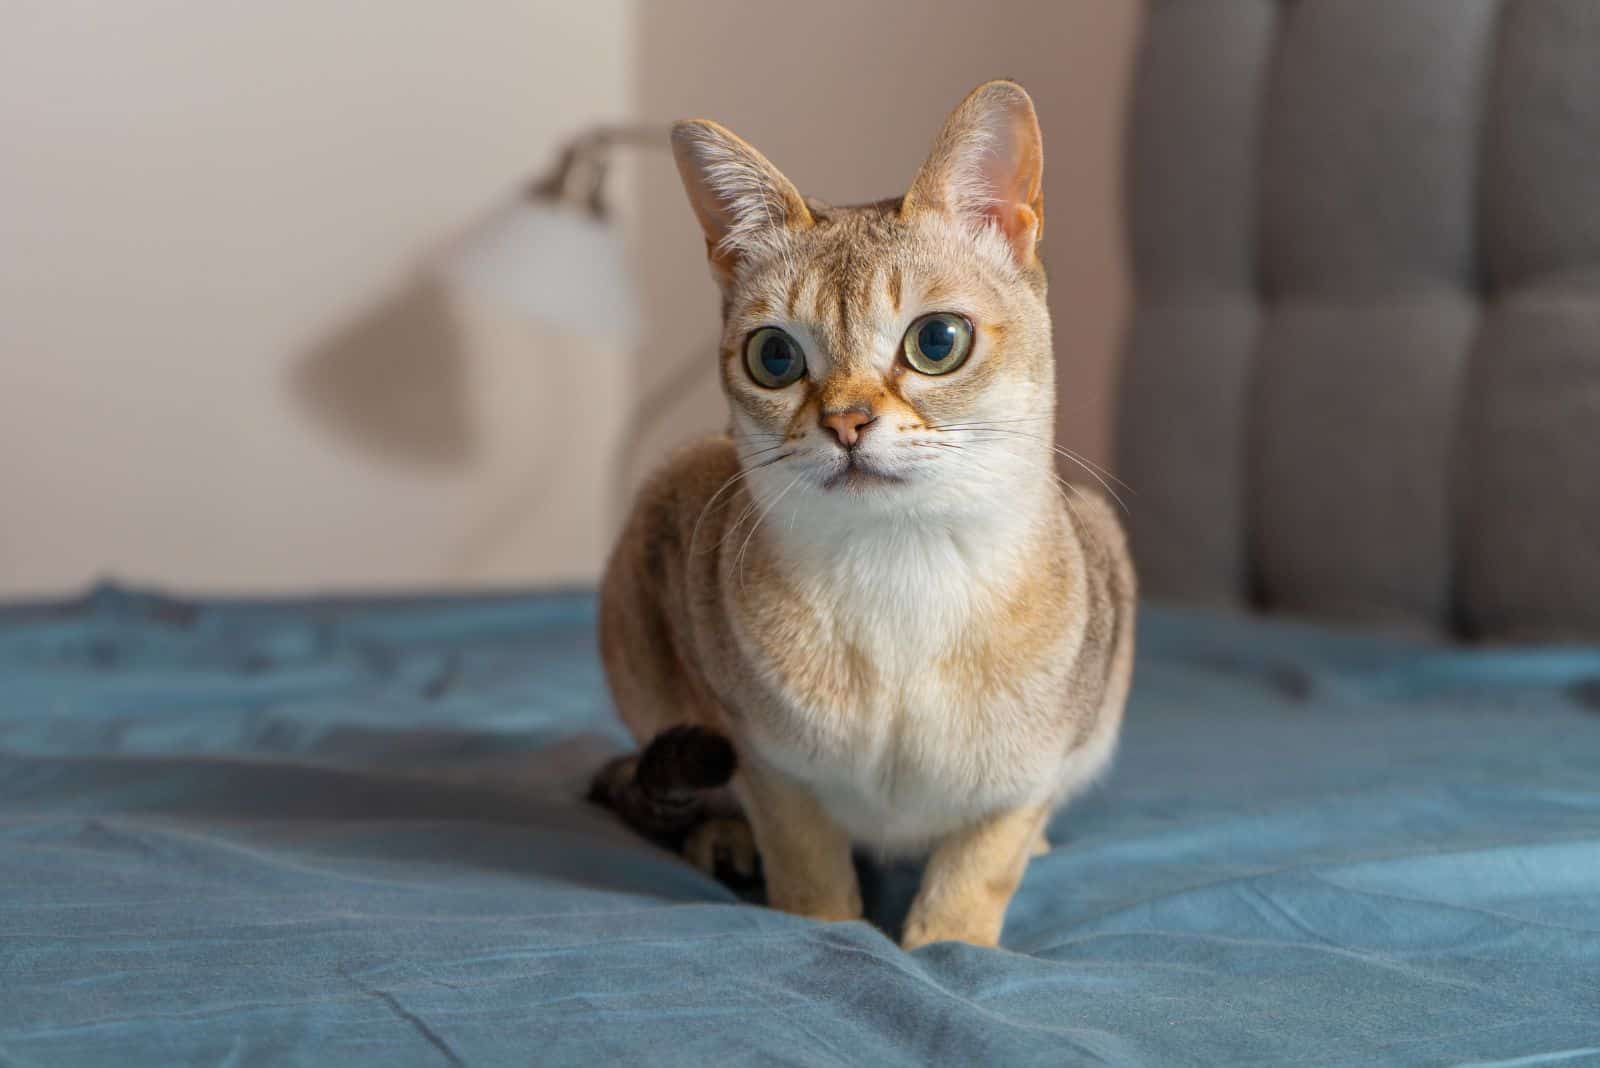 photo of a Singapura cat, one of the smallest cat breeds